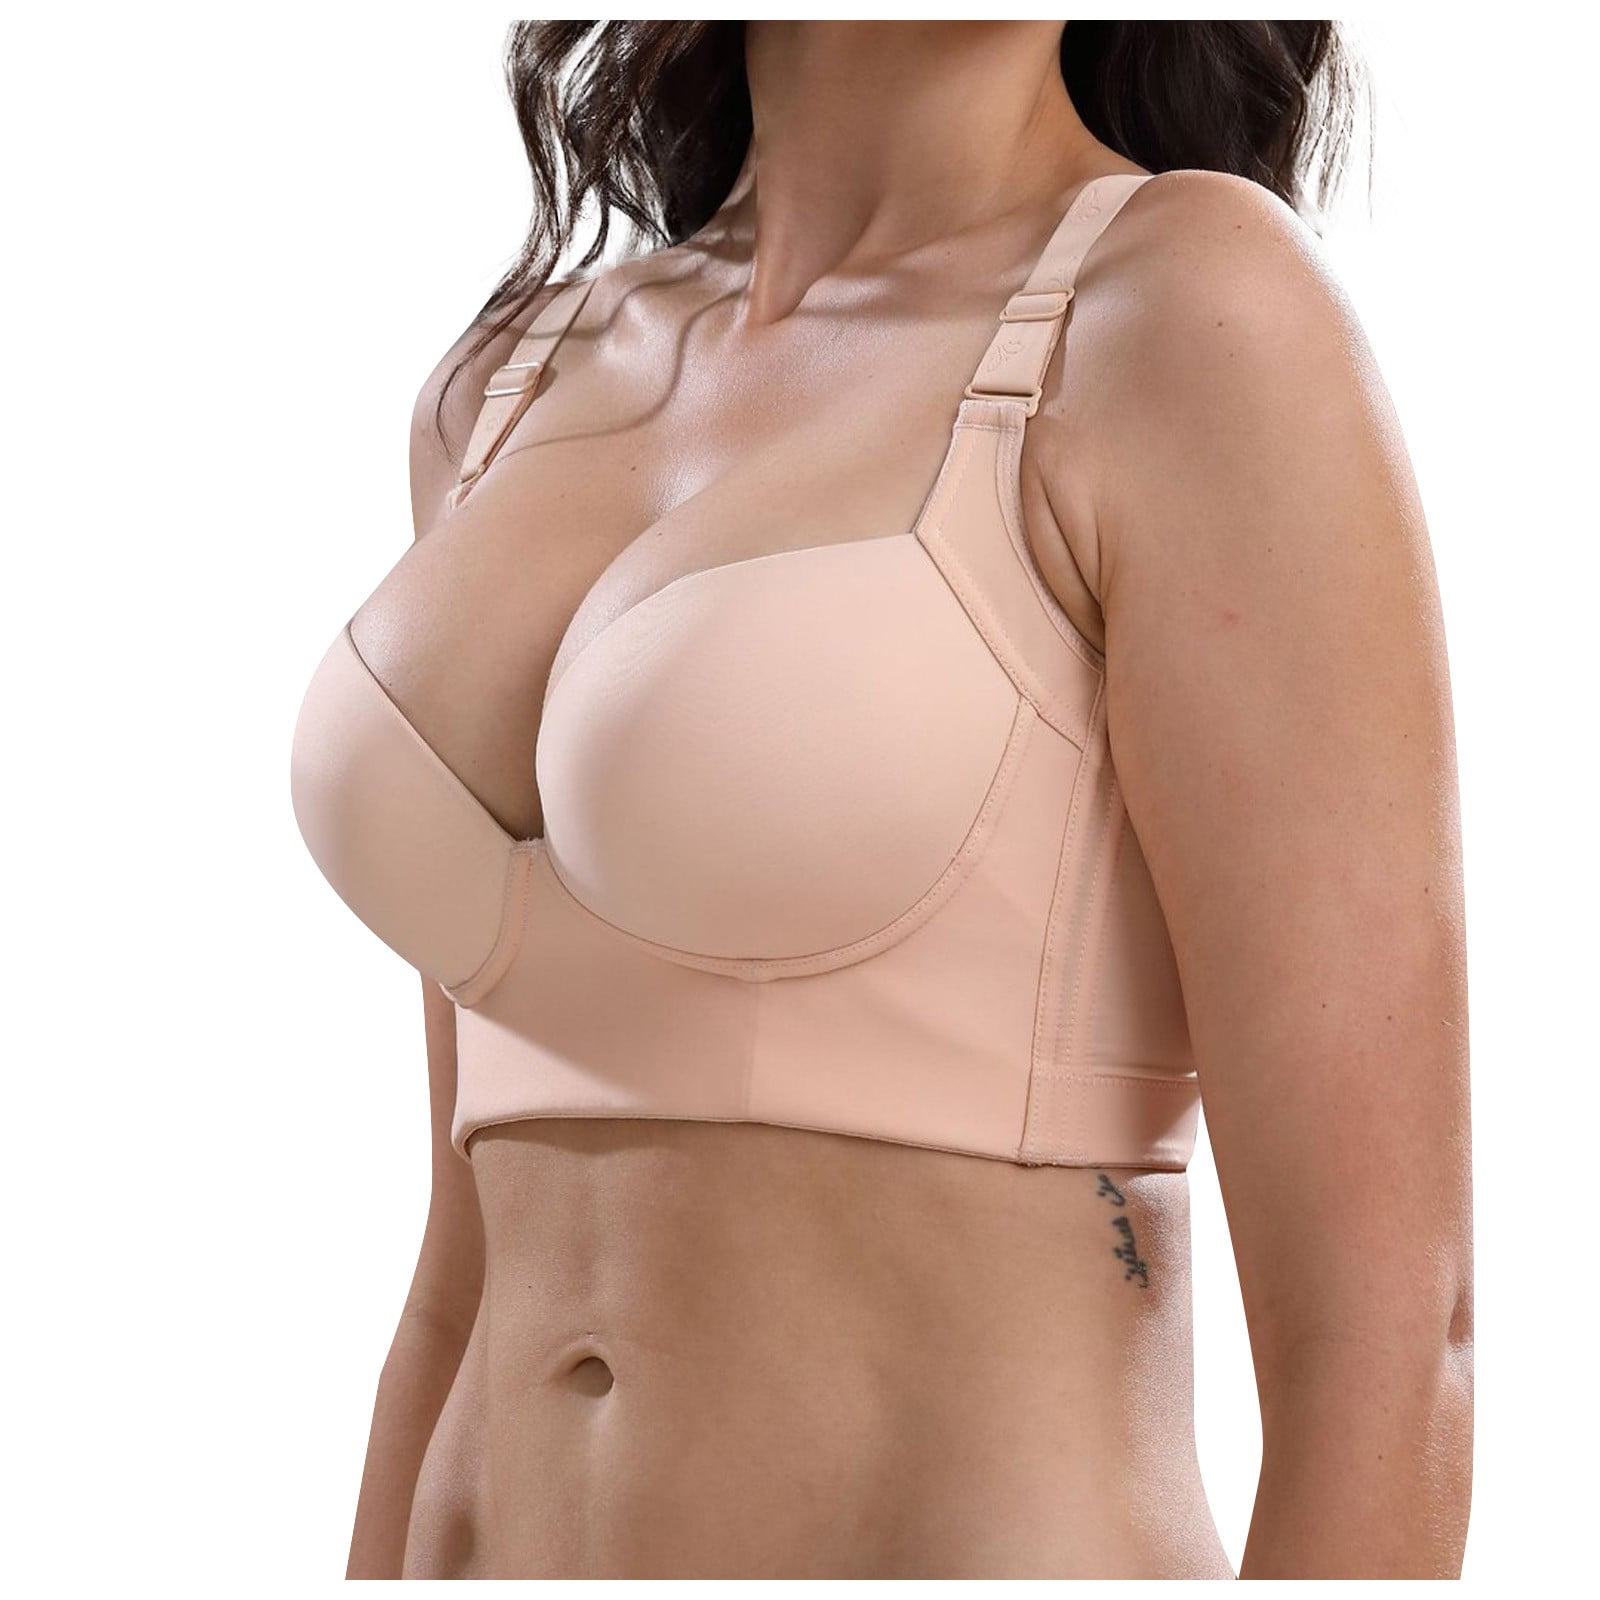 Buy Scoopy Women's Alexa Cotton Modal Padded Non Wired Bra/B Cup